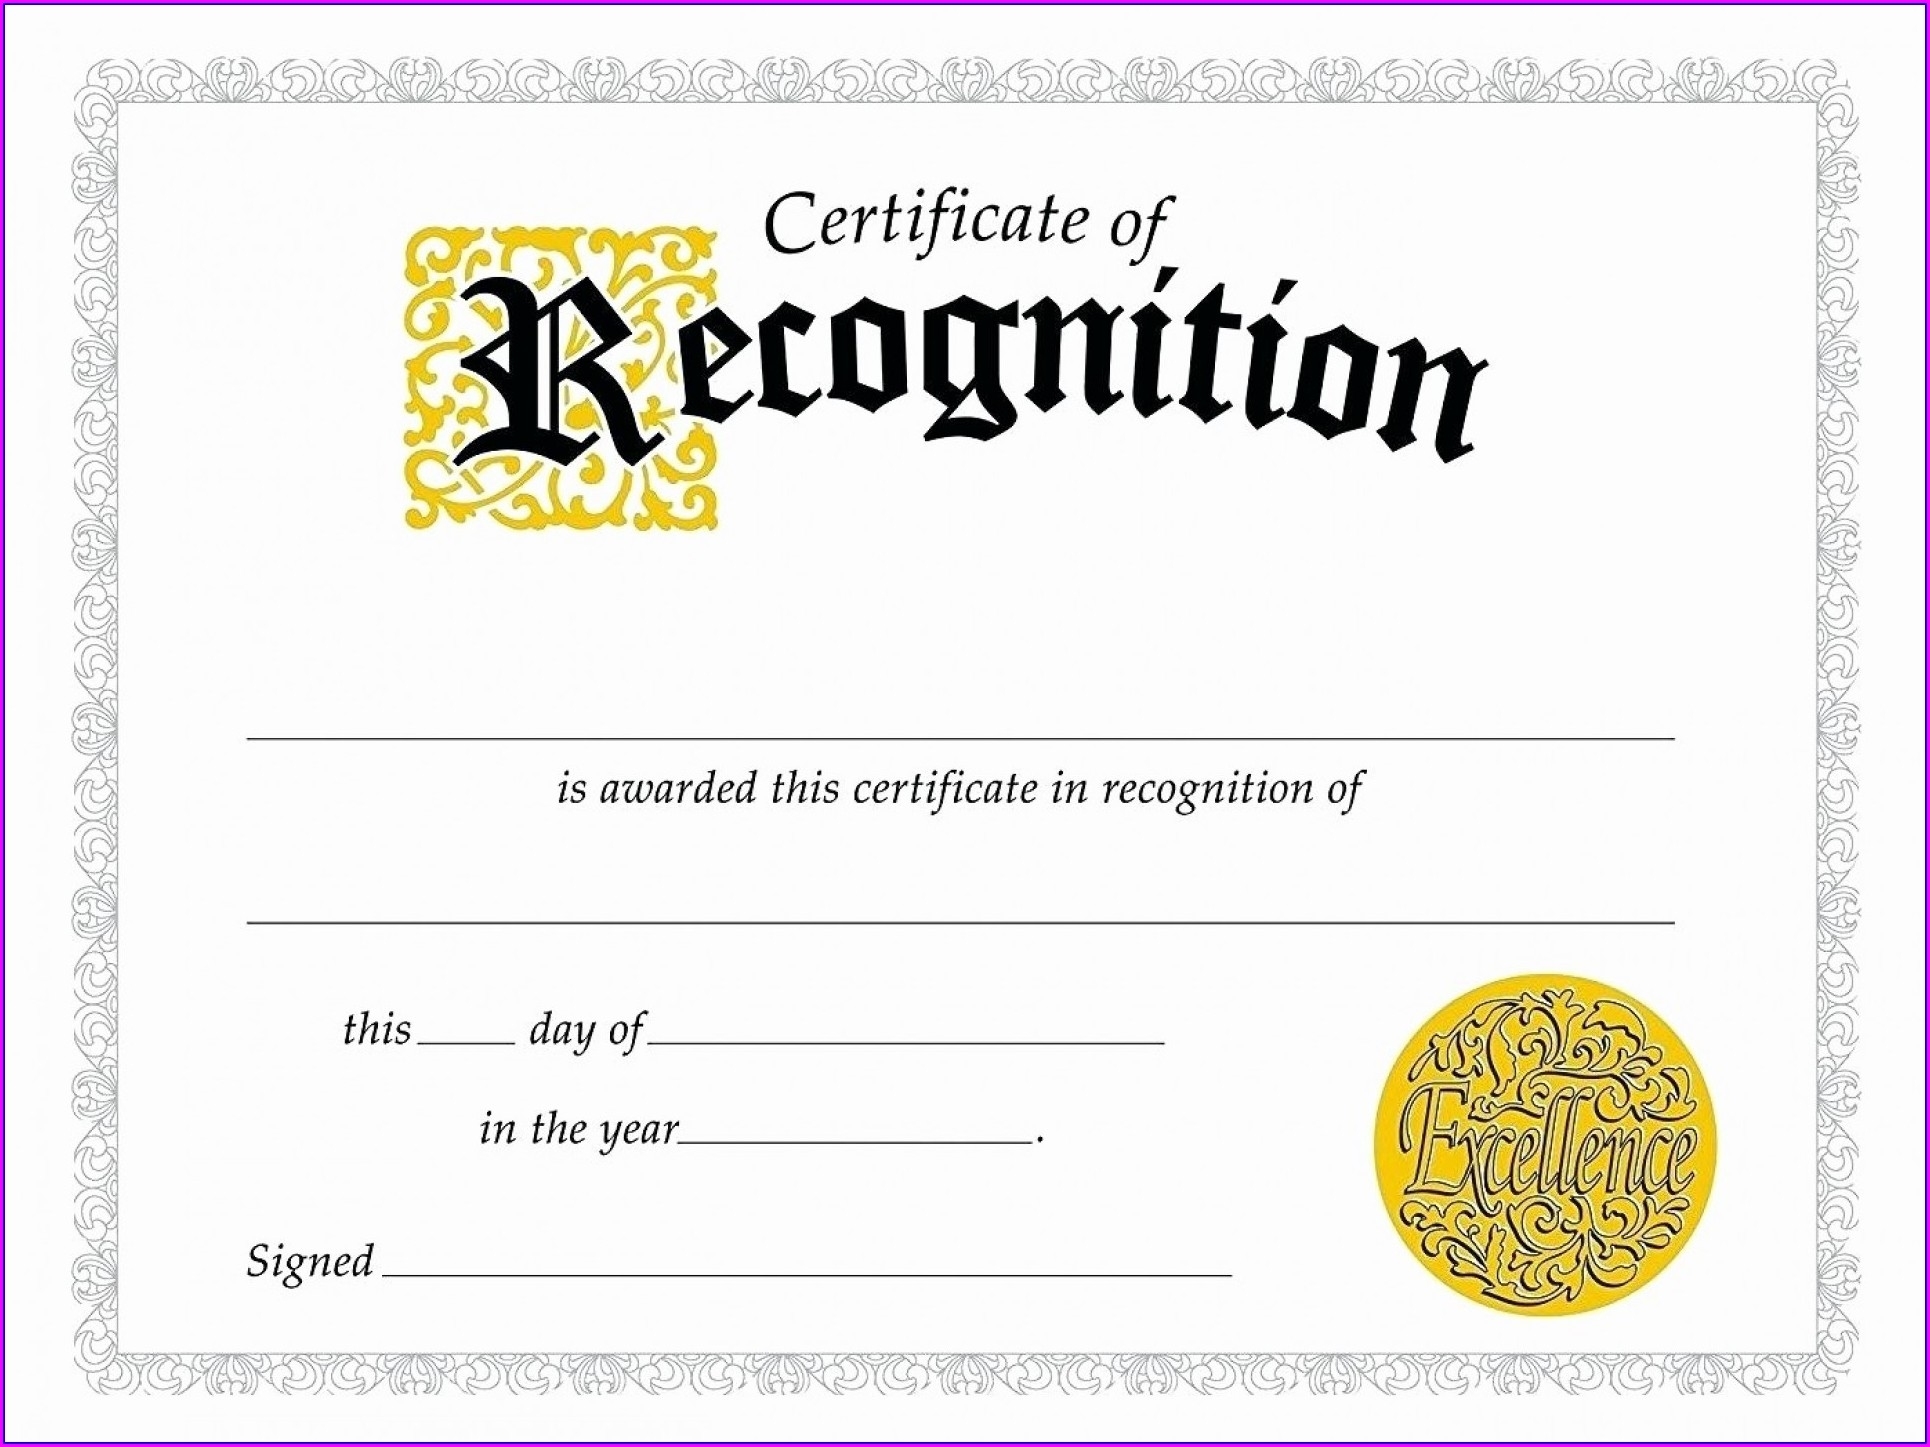 Employee Recognition Certificates Templates Free Templates 2 : Resume Pertaining To Employee Recognition Certificates Templates Free